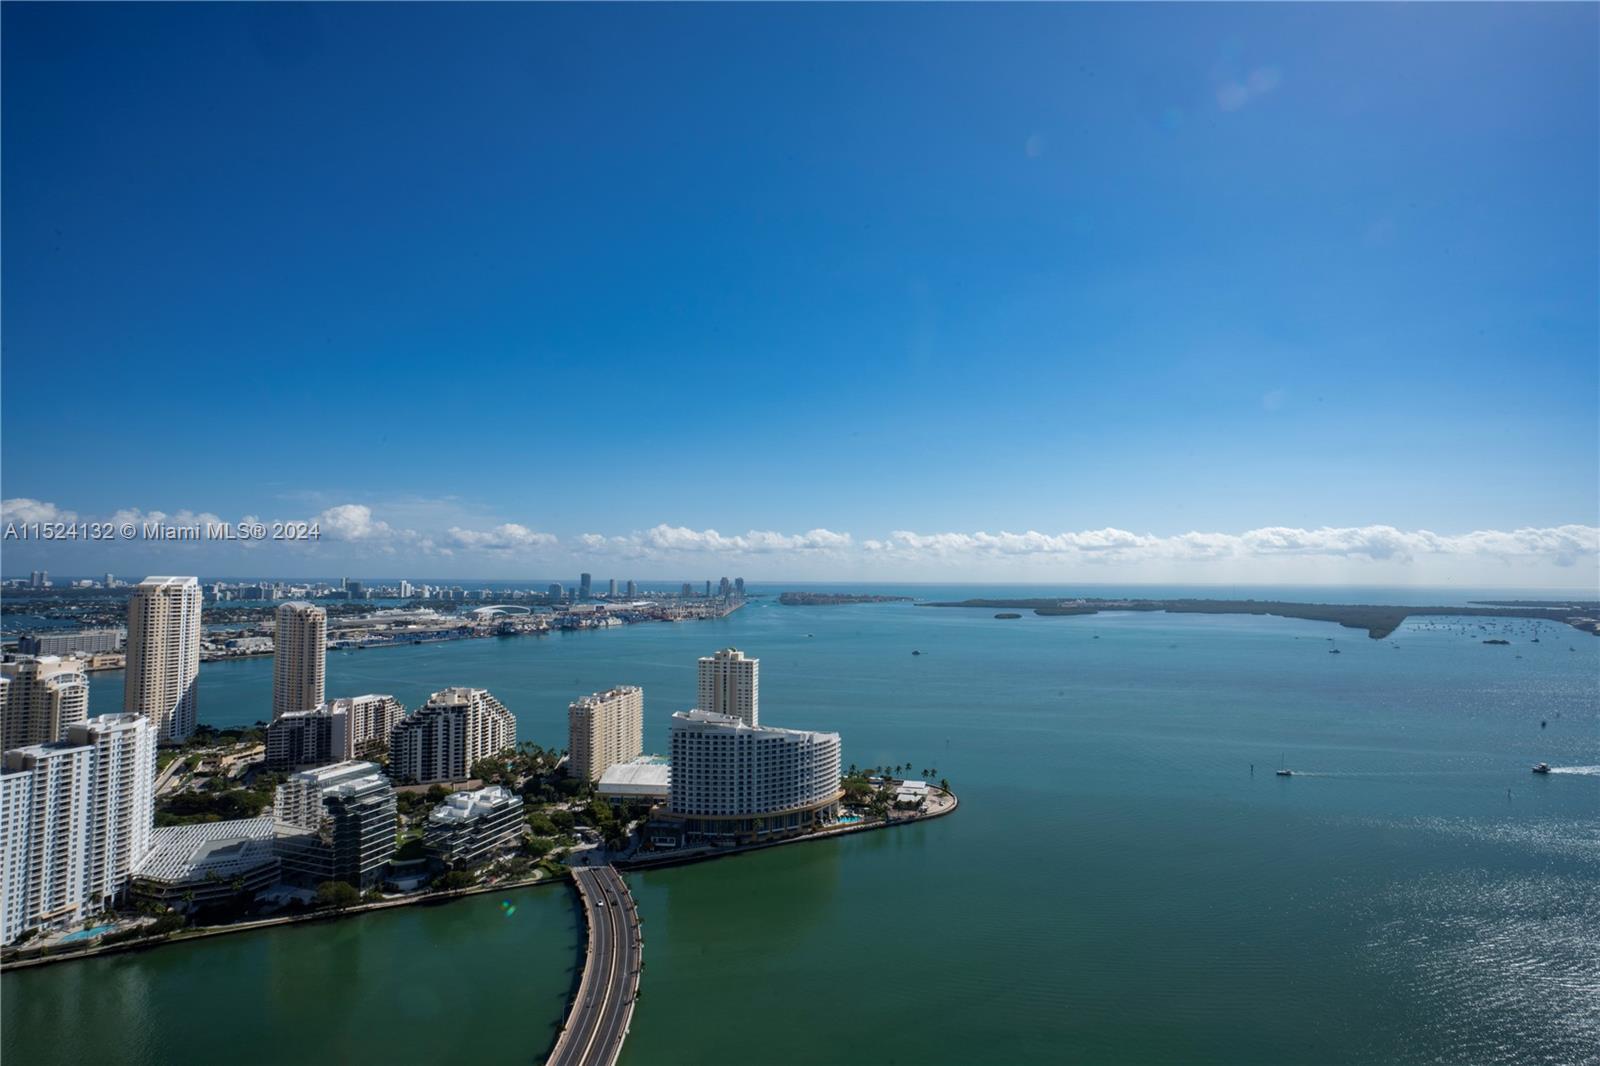 Beautifully designed 2 bedroom 2.5 bath with direct bayfront views overlooking Biscayne Bay at the Plaza on Brickell Bay. This impeccable apartment features over 200k in upgrades, including custom furniture from Sharon Lewis, custom lighting, hardwood white oak flooring, custom blinds and blackouts w/remote control, closet build outs, surround sound speaker system, and 10 ft ceilings. The unit includes 2 parking spaces and comes fully equipped with everything you need. All you need bring is your suitcase! Residents of The Plaza on Brickell have access to a plethora of exceptional amenities including a state-of-the-art fitness center, sauna, two infinity edge swimming pools, hot tub, well-appointed business center, theater room for cinematic experiences, and stylish clubroom for gatherings.